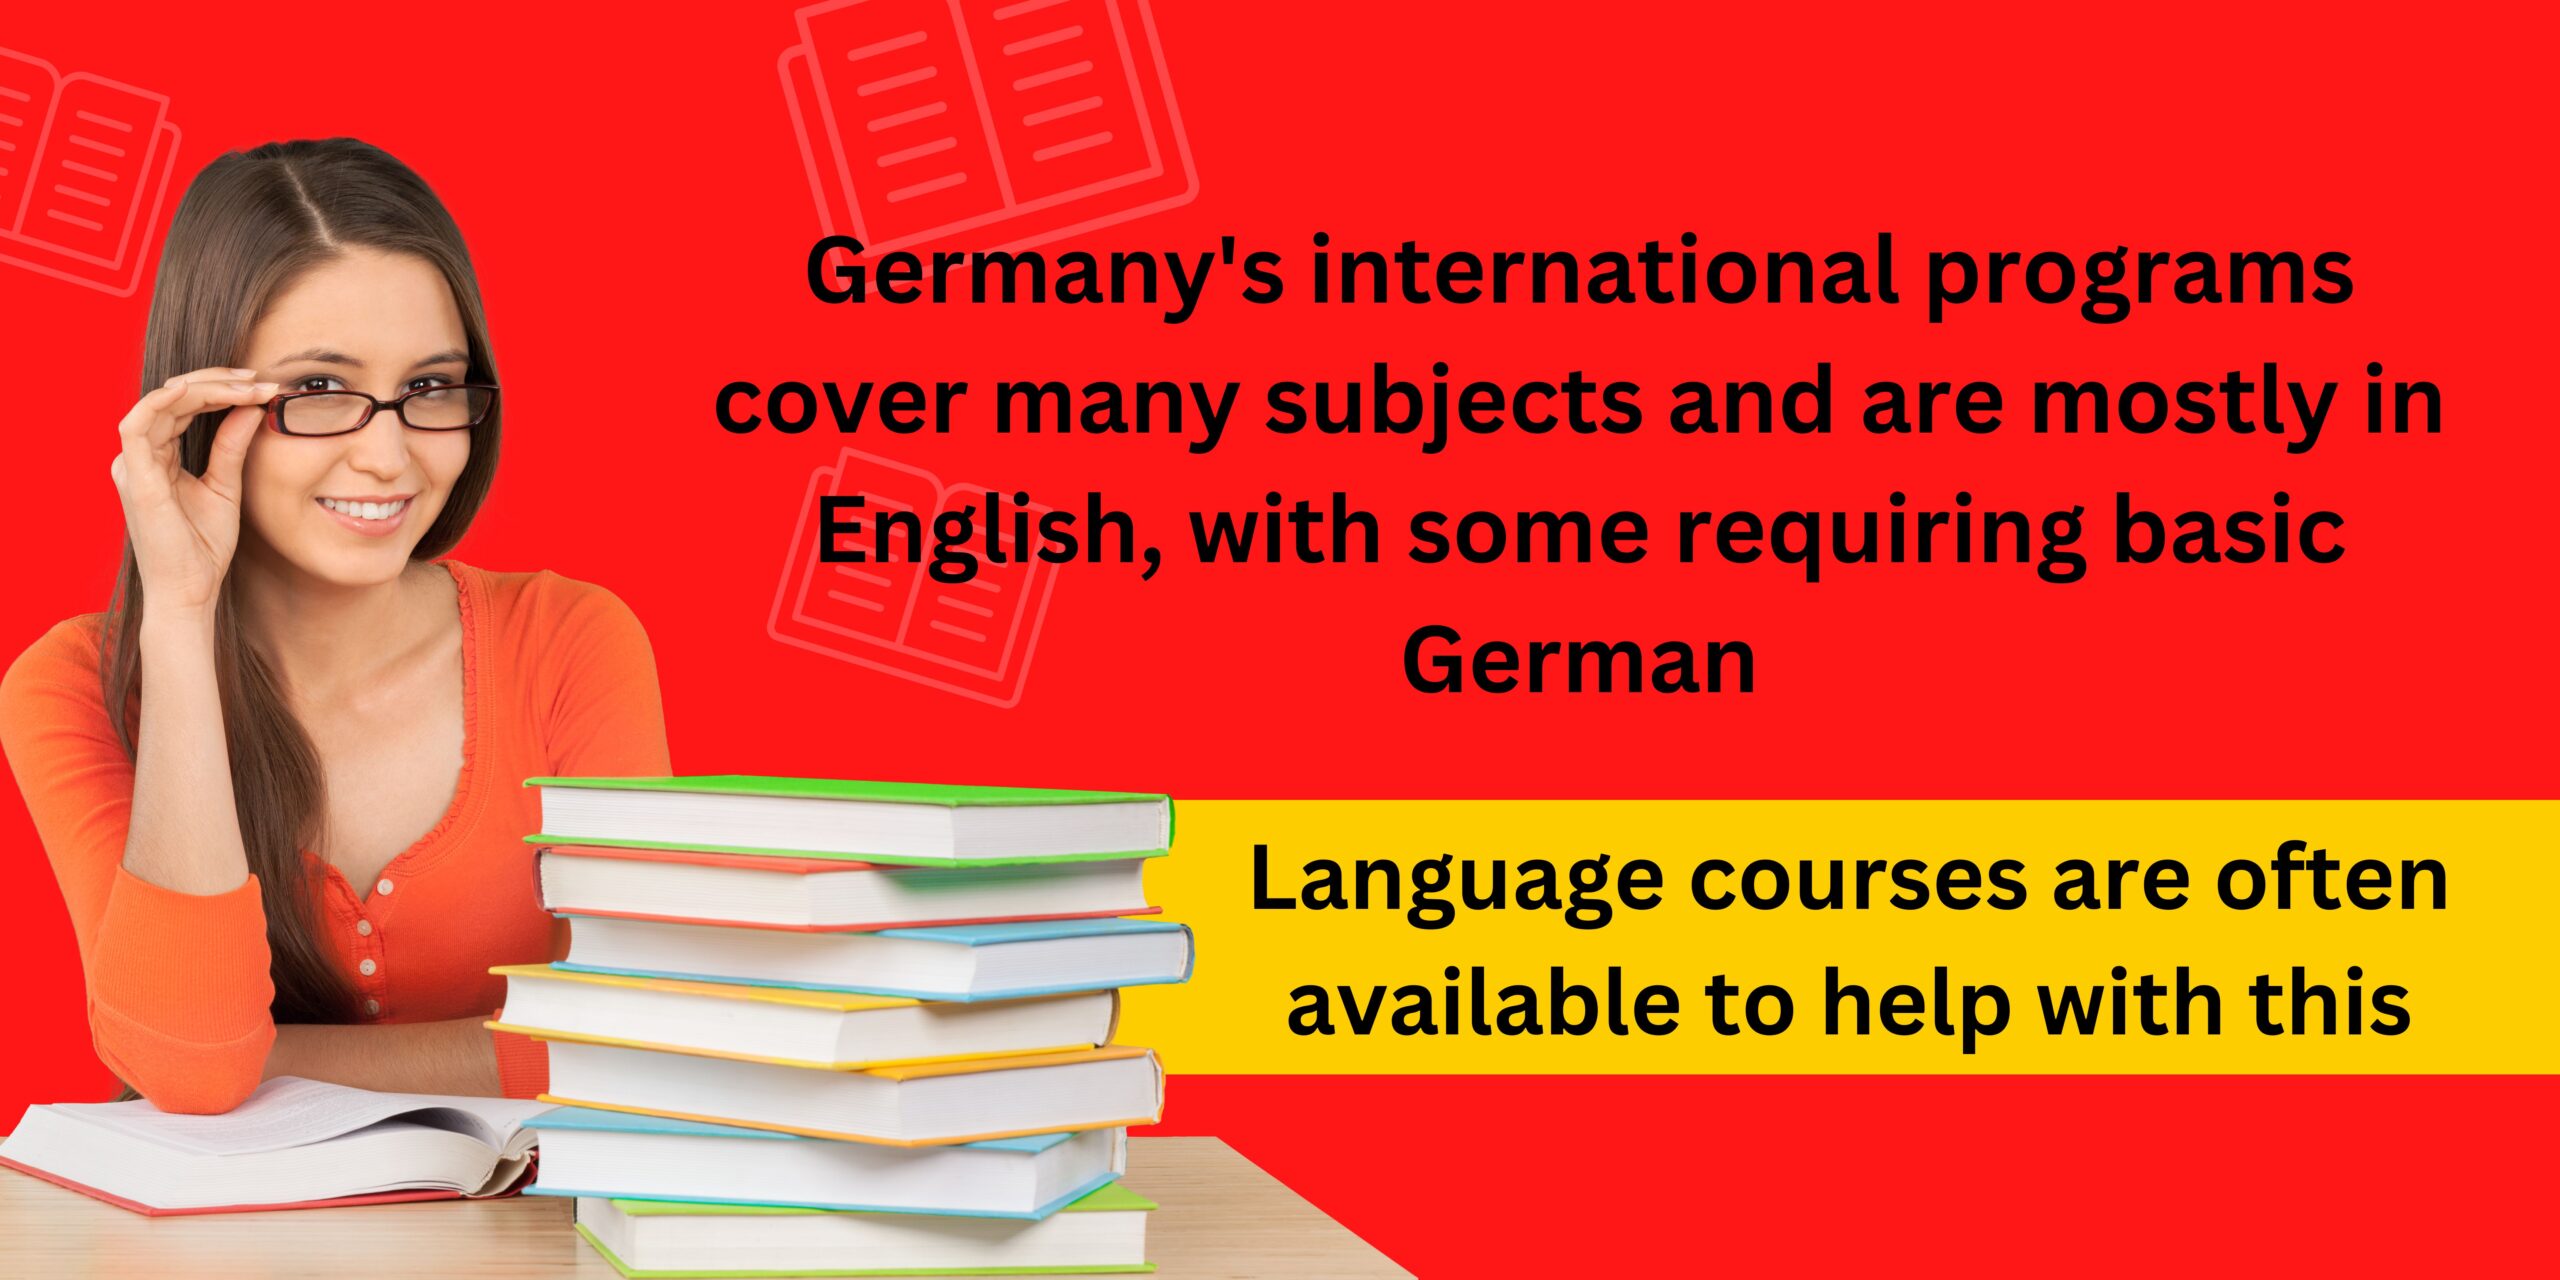 PhD in Germany - KCR CONSULTANTS - English Taught program in germany